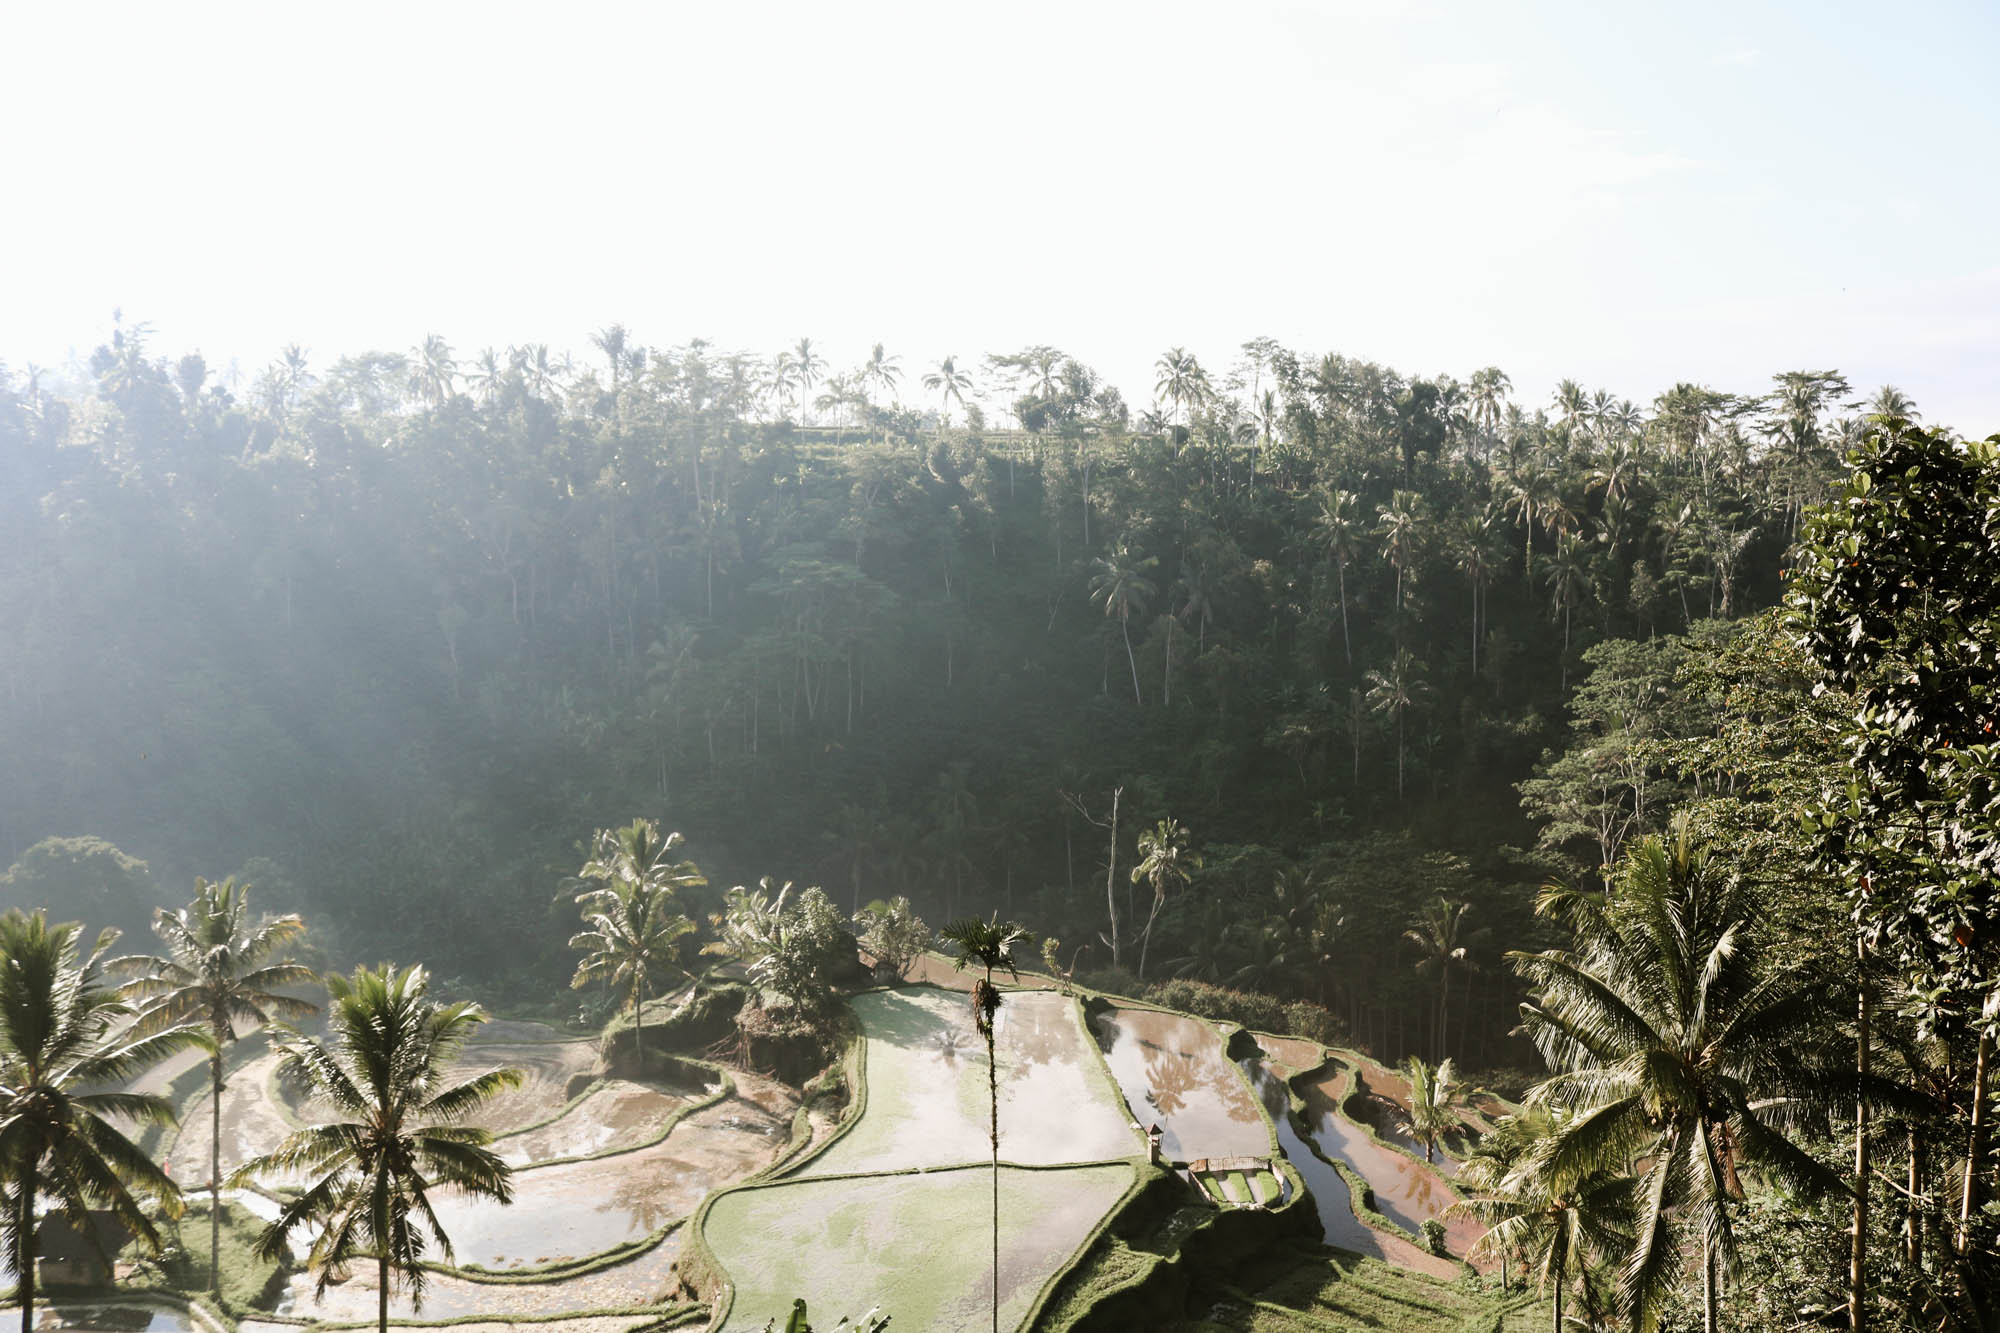 Nestled in the cliffside of a small rural village about 30 minutes north of Ubud, Bali is this magical, jungle oasis: Suarapura Resort. Click to see our full review and must-see Bali adventures! 